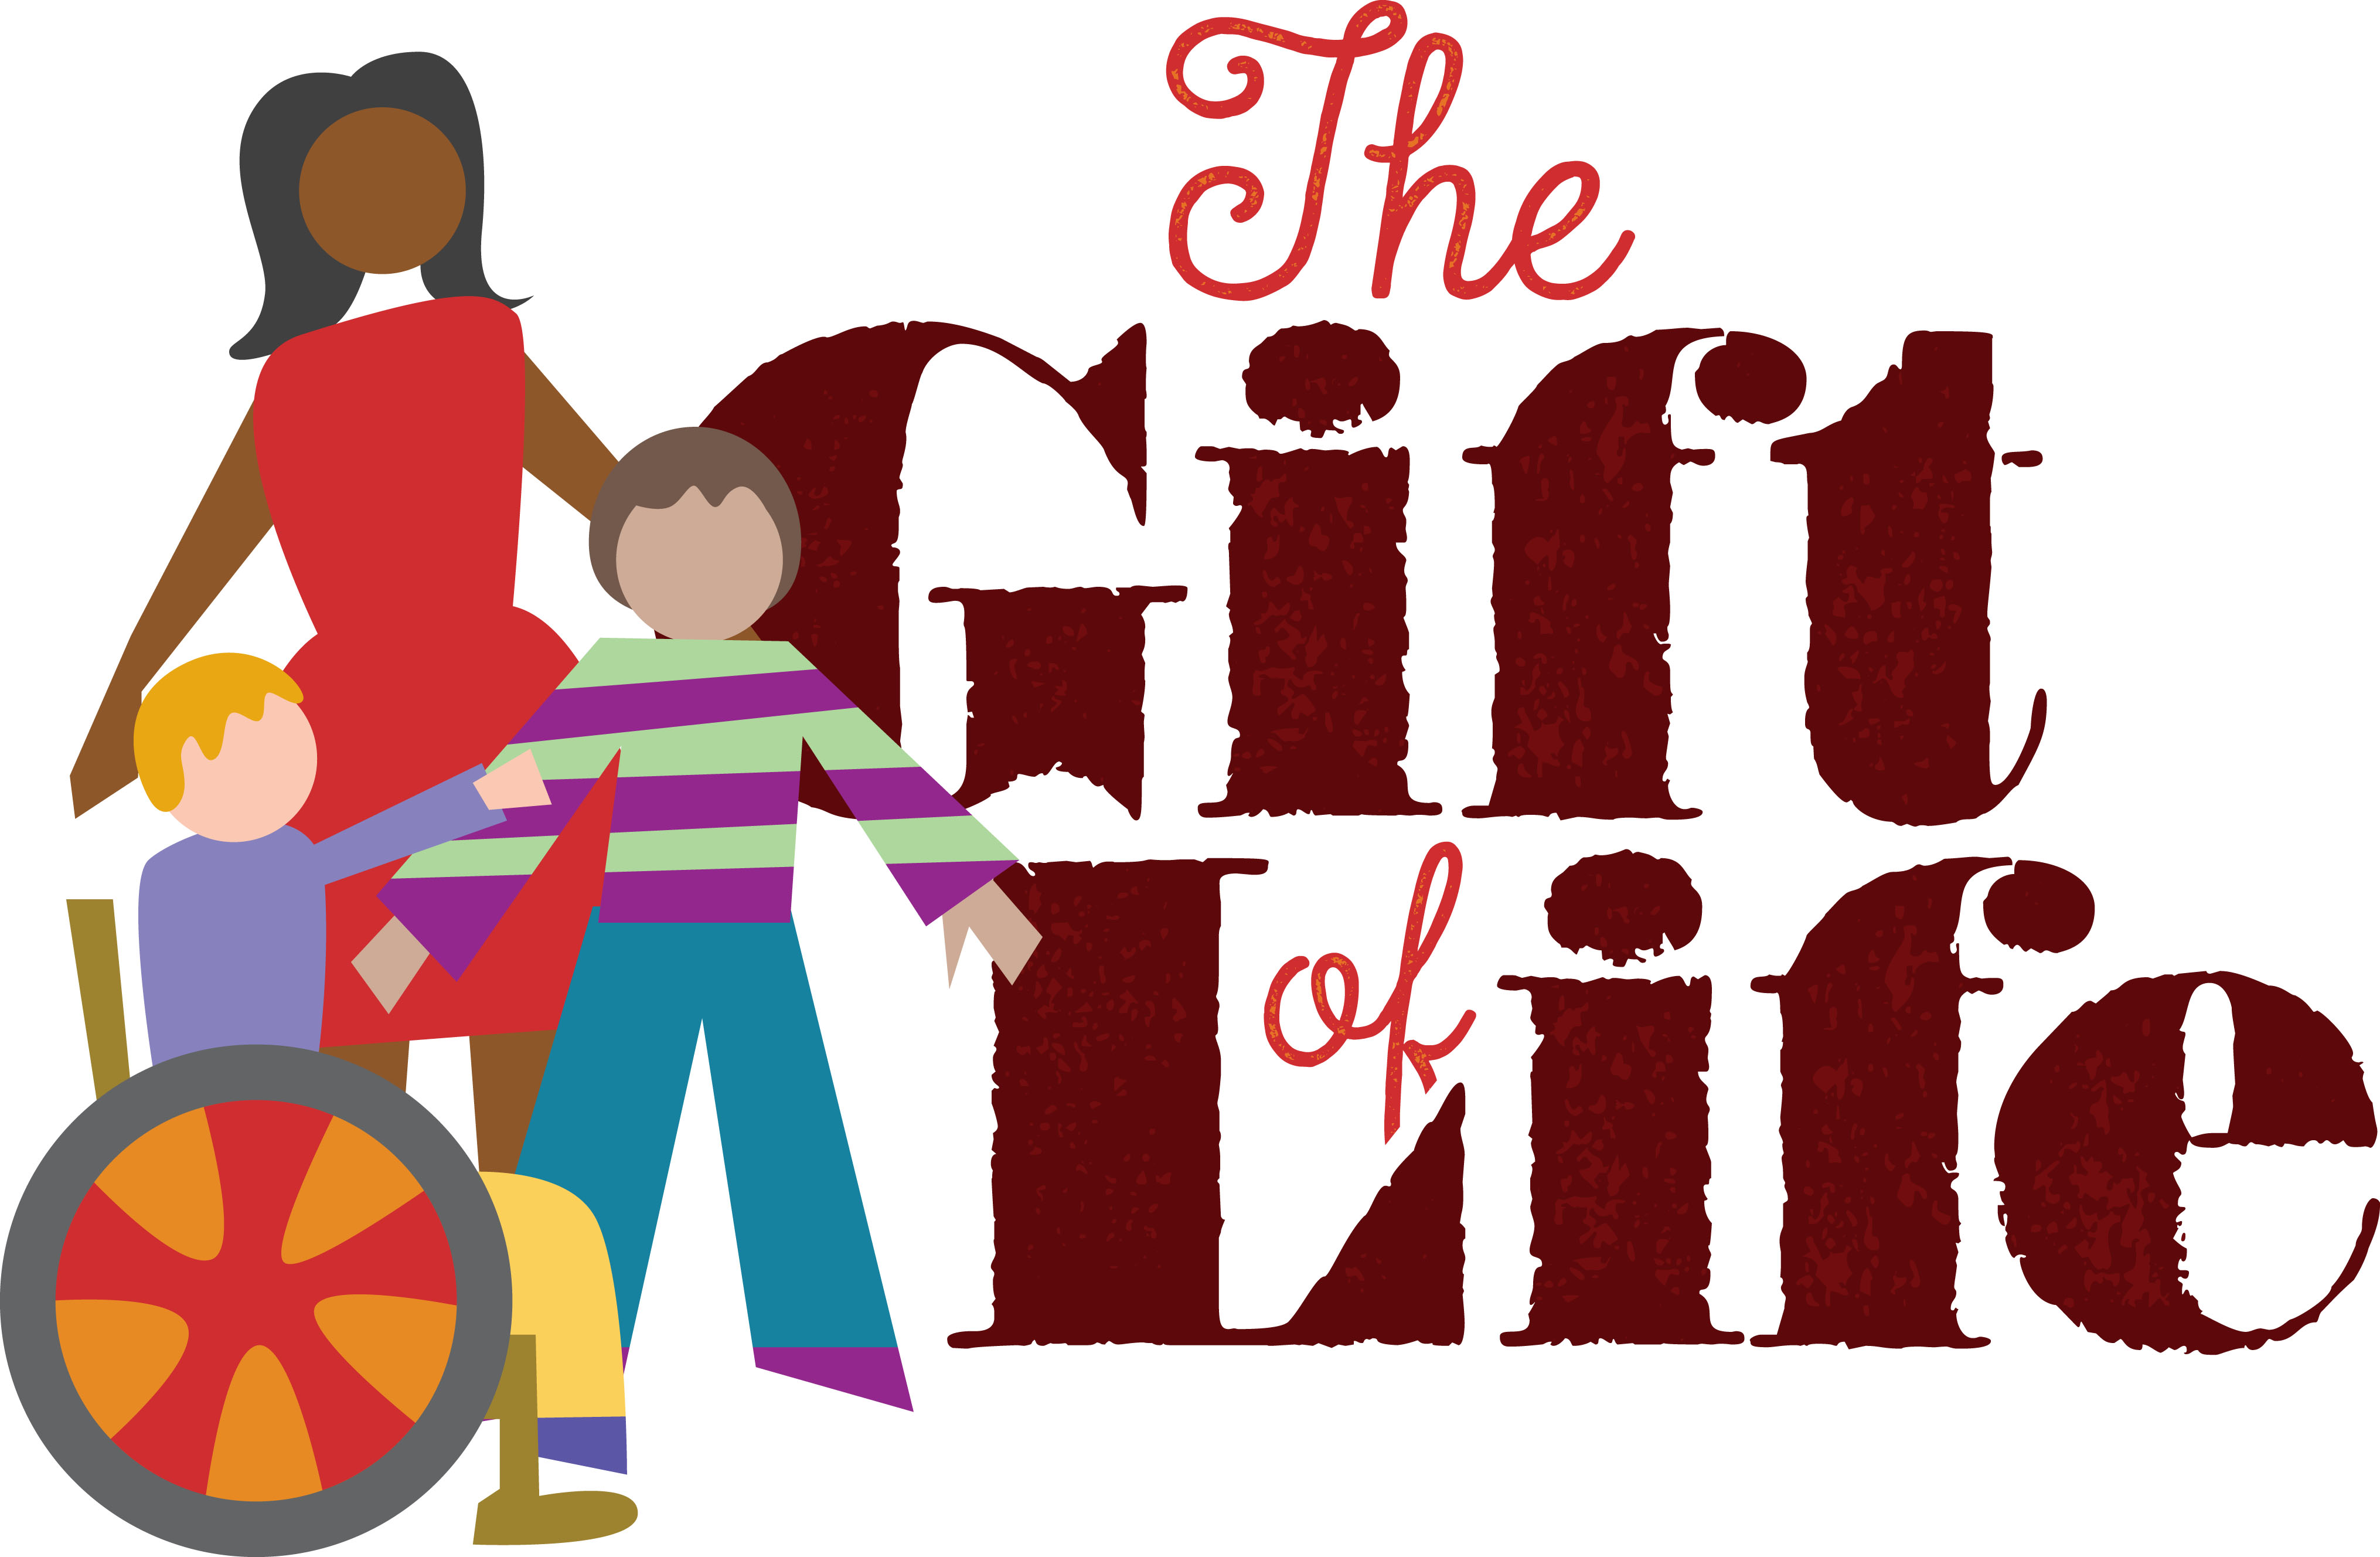 Women, one child standing, one child in wheelchair with words "The Gift of Life."